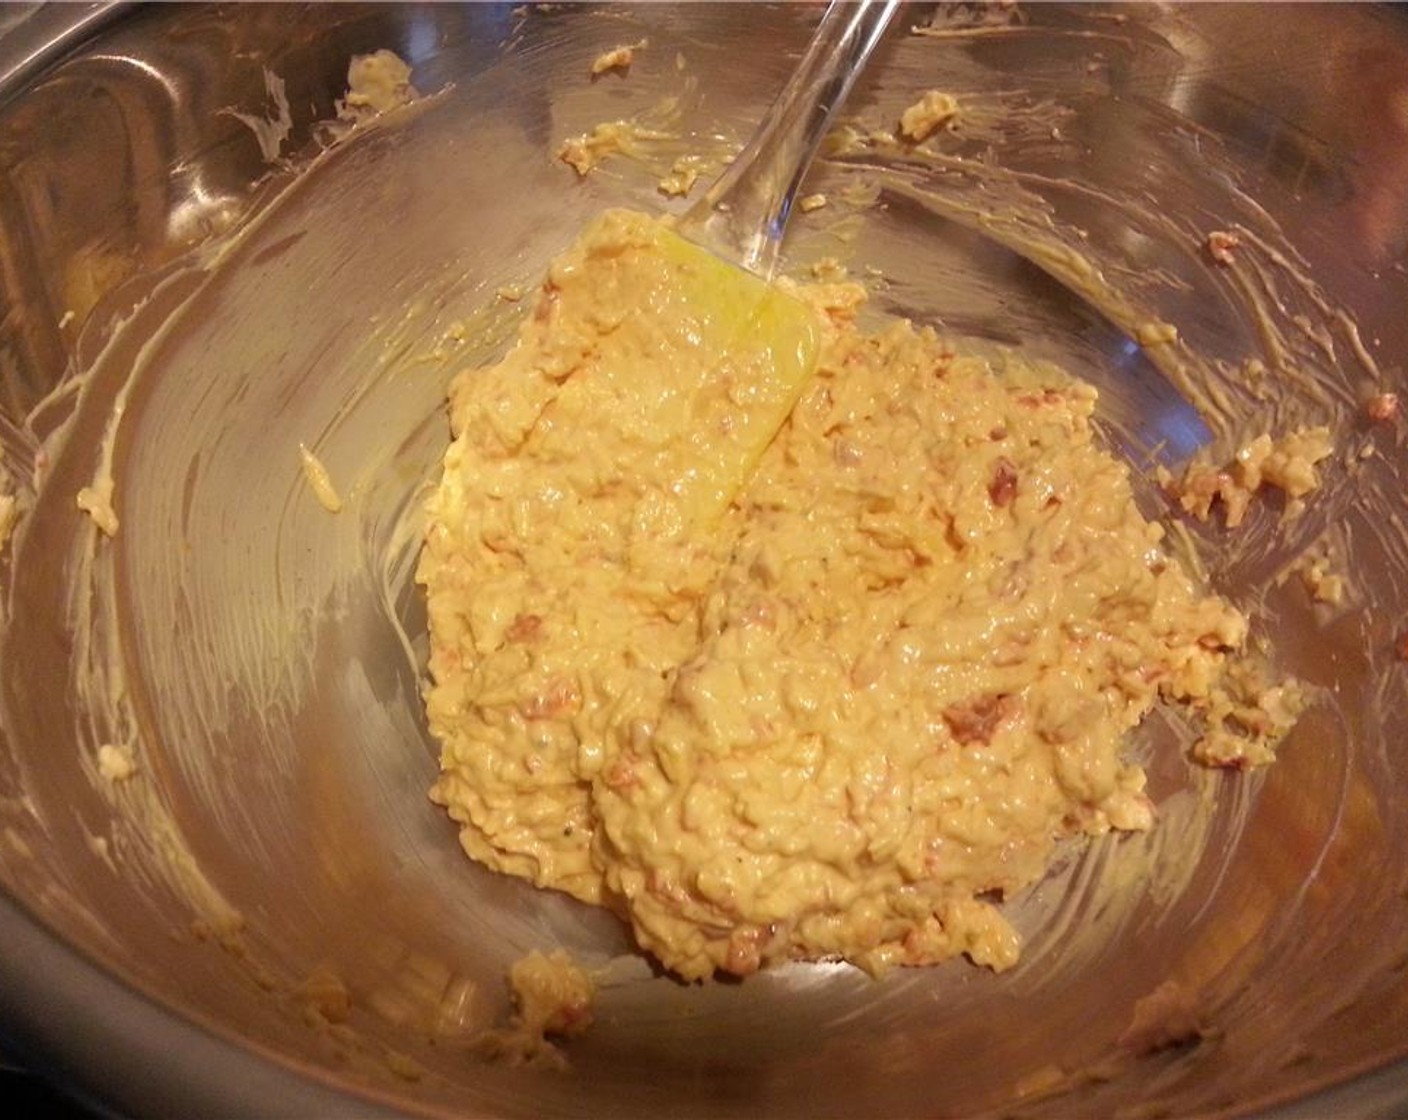 step 8 Fold in the grated cheddar and mix thoroughly. Give a final taste to make sure the seasoning is right.